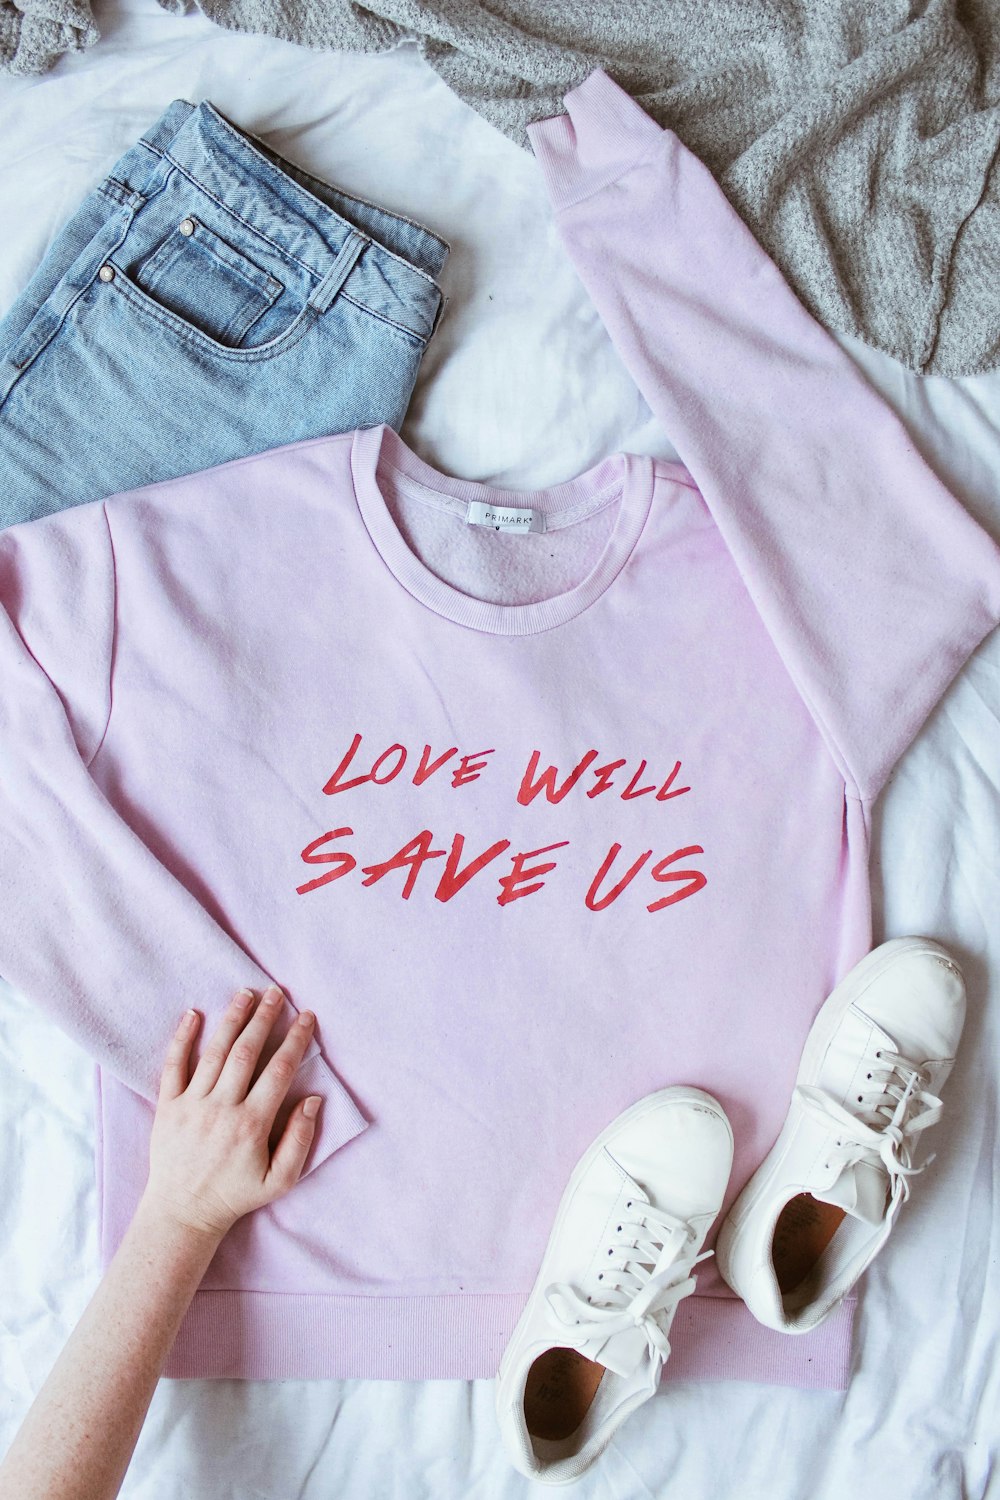 pink long-sleeved shirt on white textile near white low-top sneakers and blue denim bottoms